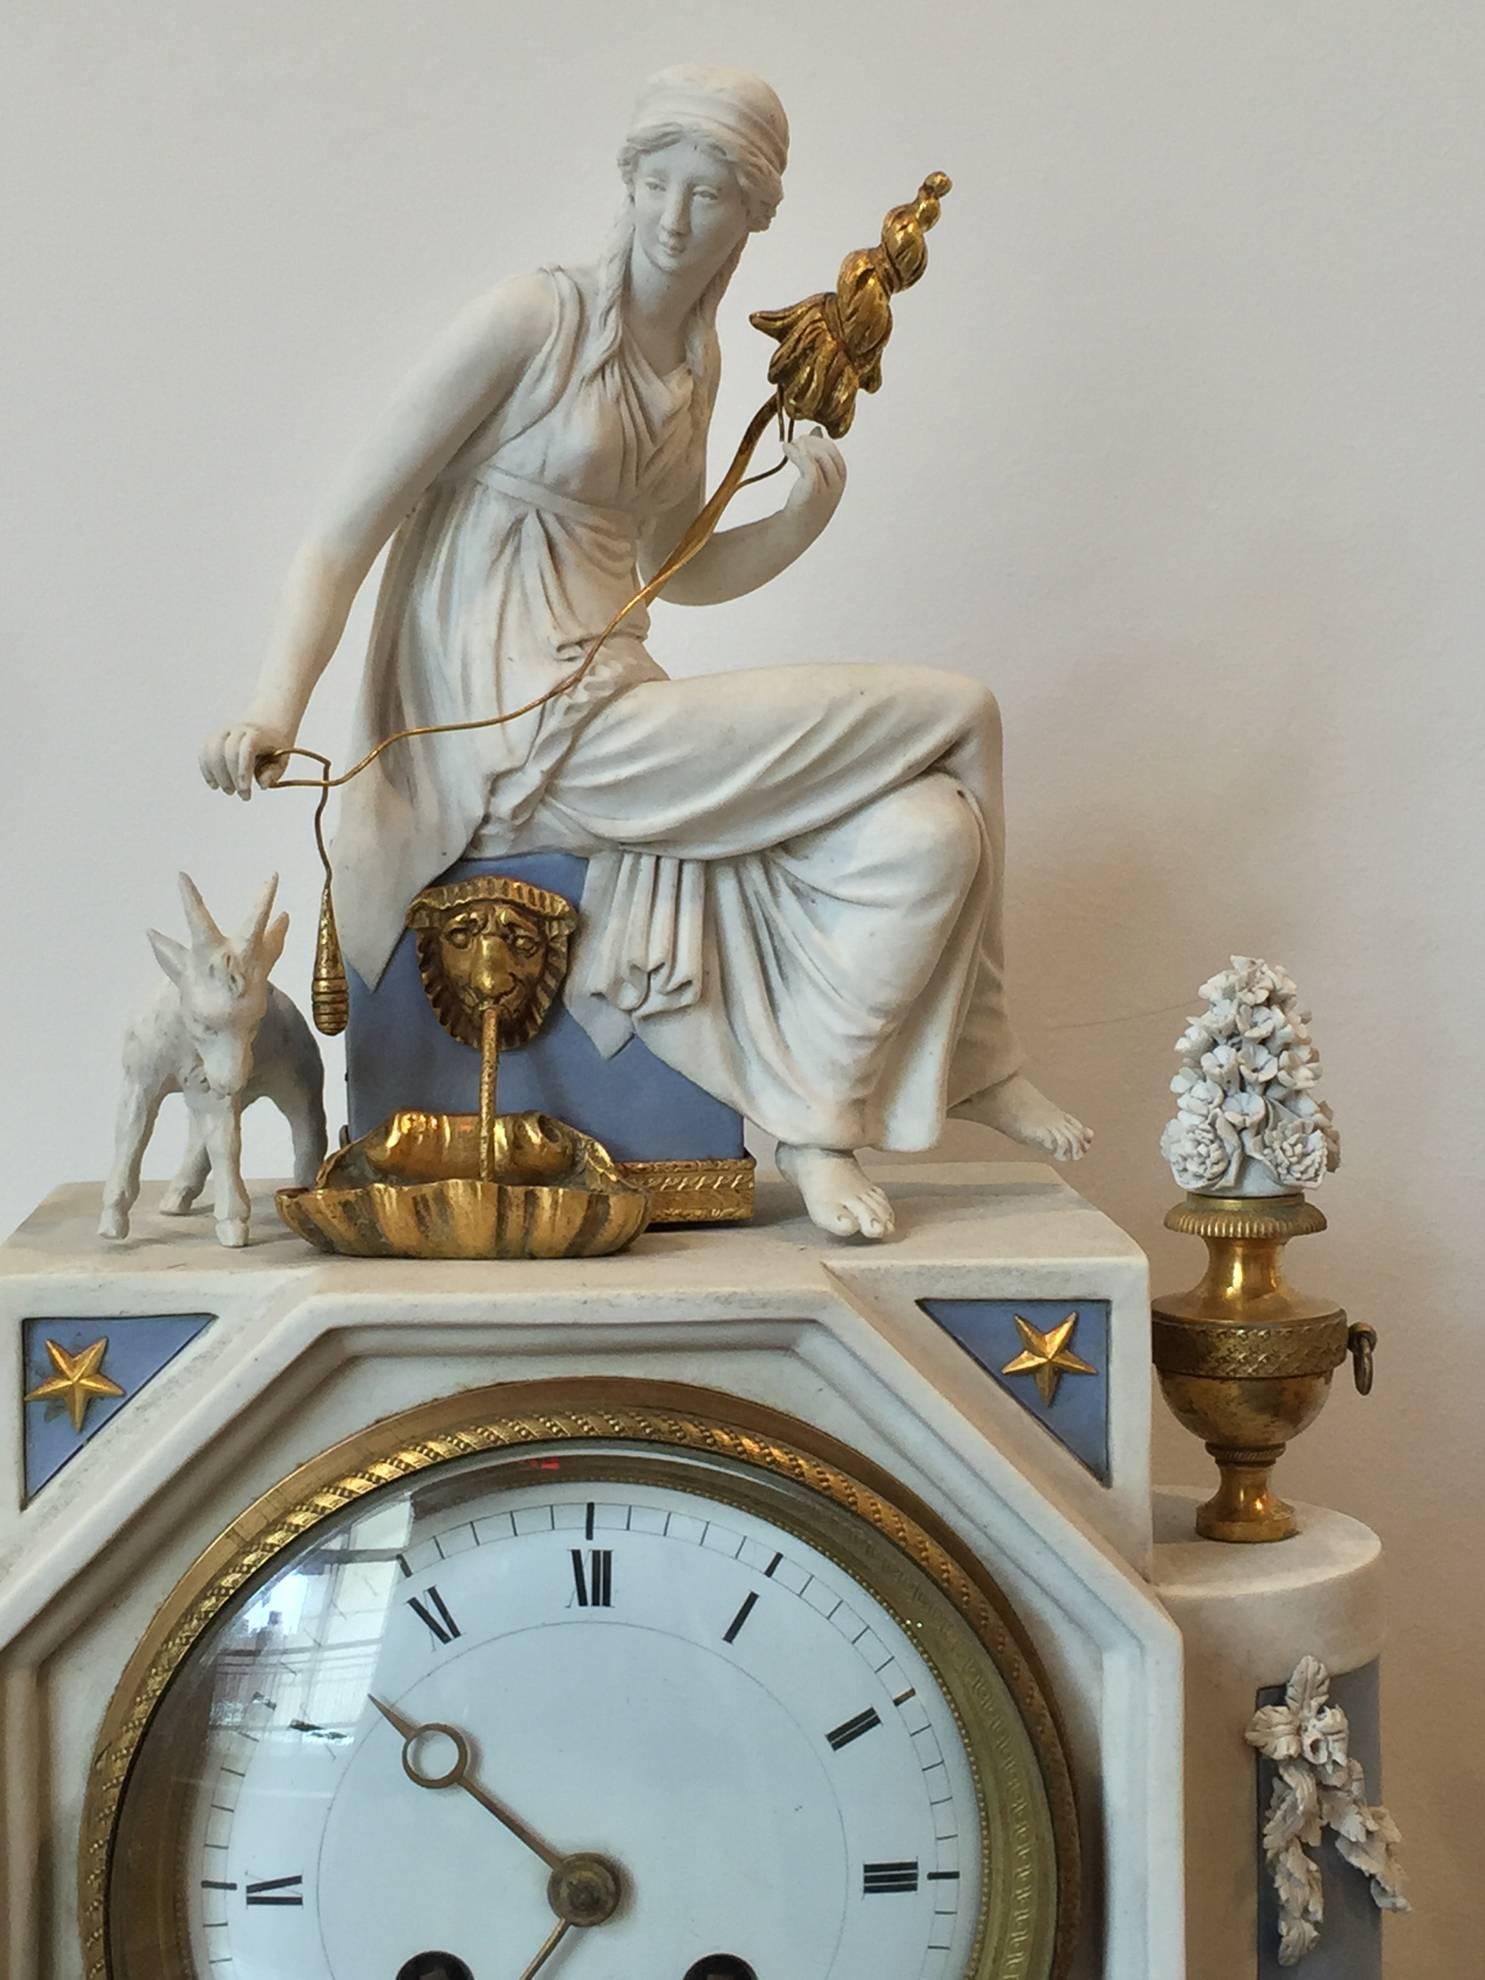 A fine Louis XVI period white and blue porcelain bisque clock, with the figure of a neoclassical woman with a goat and fountain, fine gilt bronze mounts, movement signed by LePautre a Paris, French, late 18th century.
Measures: Width 10 1/2”, depth